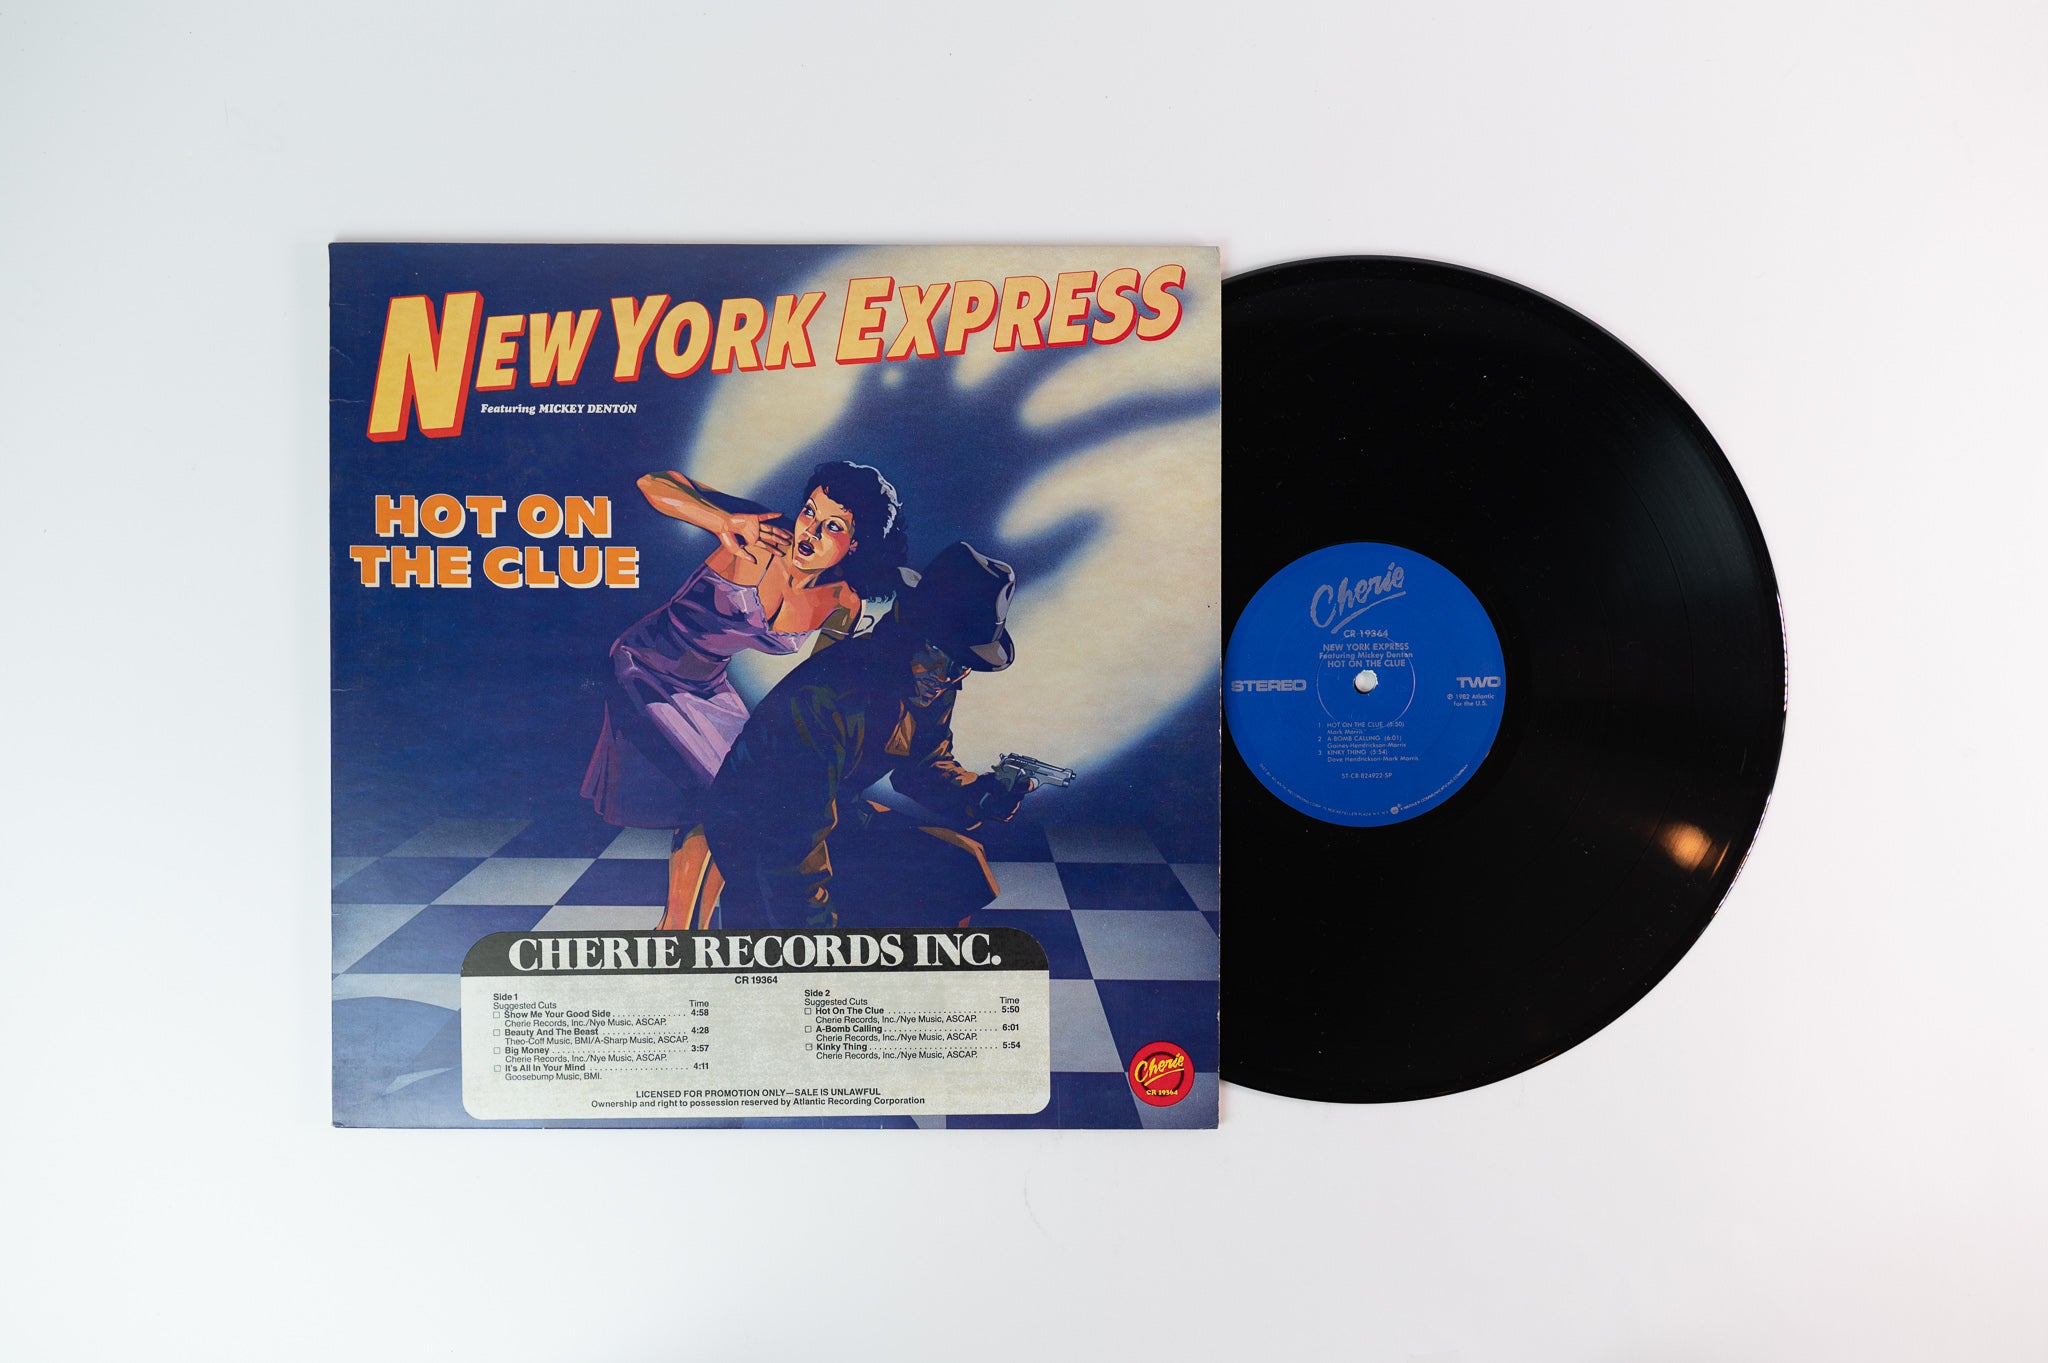 New York Express Featuring Mickey Denton - Hot On The Clue on Cherie